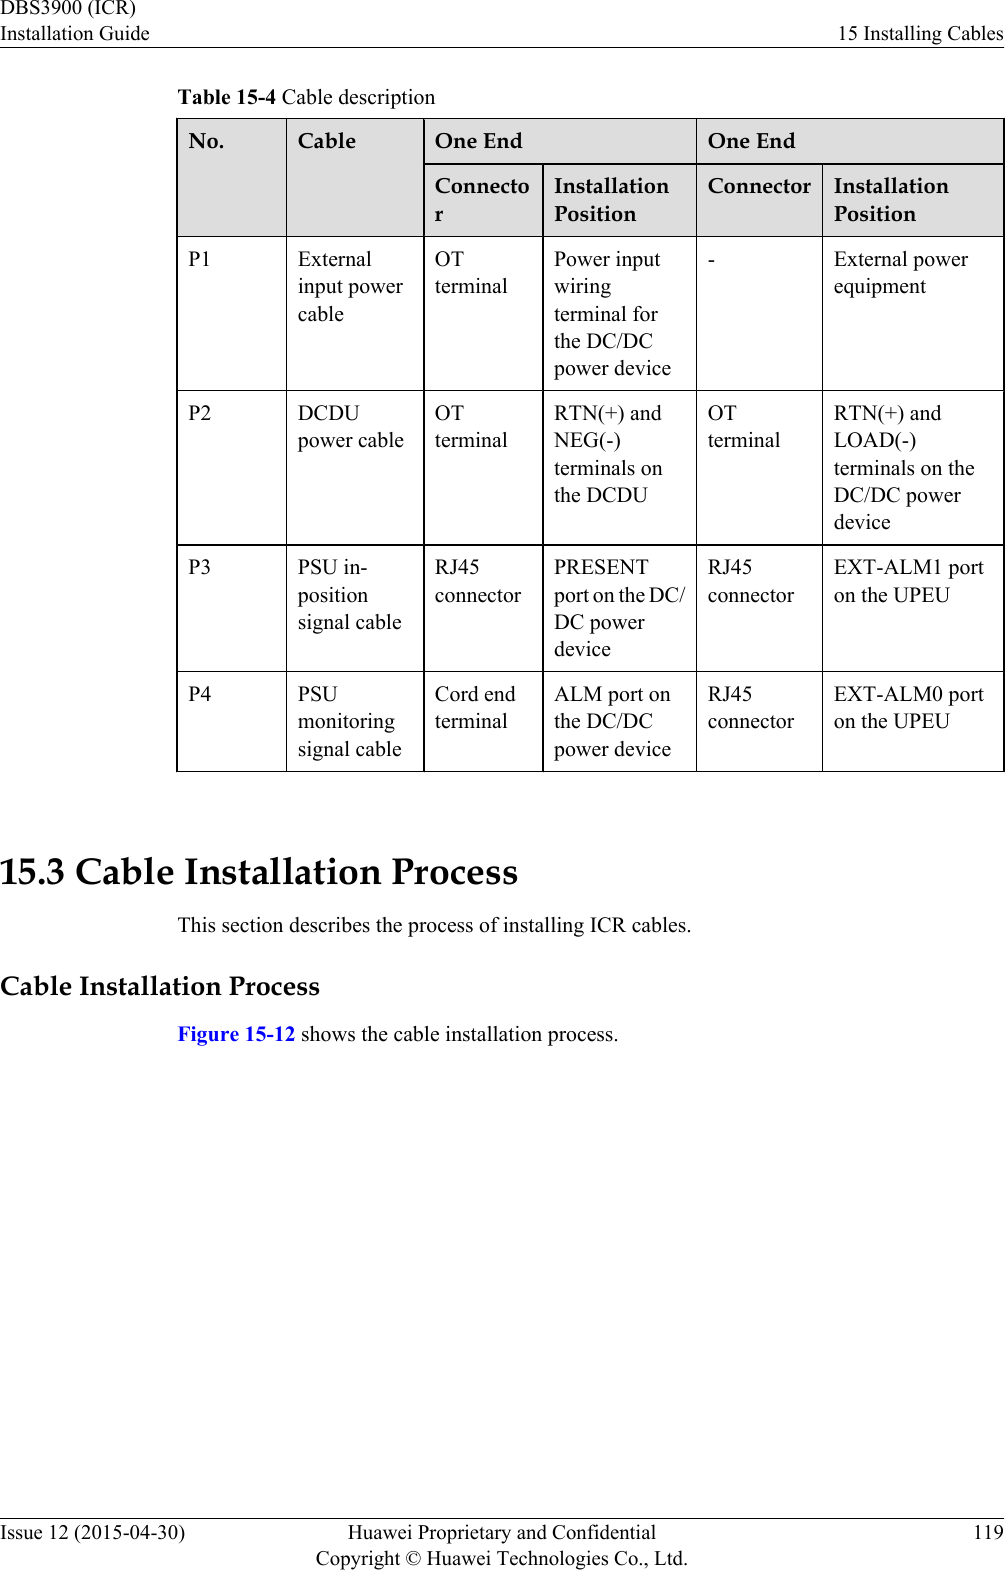 Table 15-4 Cable descriptionNo. Cable One End One EndConnectorInstallationPositionConnector InstallationPositionP1 Externalinput powercableOTterminalPower inputwiringterminal forthe DC/DCpower device- External powerequipmentP2 DCDUpower cableOTterminalRTN(+) andNEG(-)terminals onthe DCDUOTterminalRTN(+) andLOAD(-)terminals on theDC/DC powerdeviceP3 PSU in-positionsignal cableRJ45connectorPRESENTport on the DC/DC powerdeviceRJ45connectorEXT-ALM1 porton the UPEUP4 PSUmonitoringsignal cableCord endterminalALM port onthe DC/DCpower deviceRJ45connectorEXT-ALM0 porton the UPEU 15.3 Cable Installation ProcessThis section describes the process of installing ICR cables.Cable Installation ProcessFigure 15-12 shows the cable installation process.DBS3900 (ICR)Installation Guide 15 Installing CablesIssue 12 (2015-04-30) Huawei Proprietary and ConfidentialCopyright © Huawei Technologies Co., Ltd.119